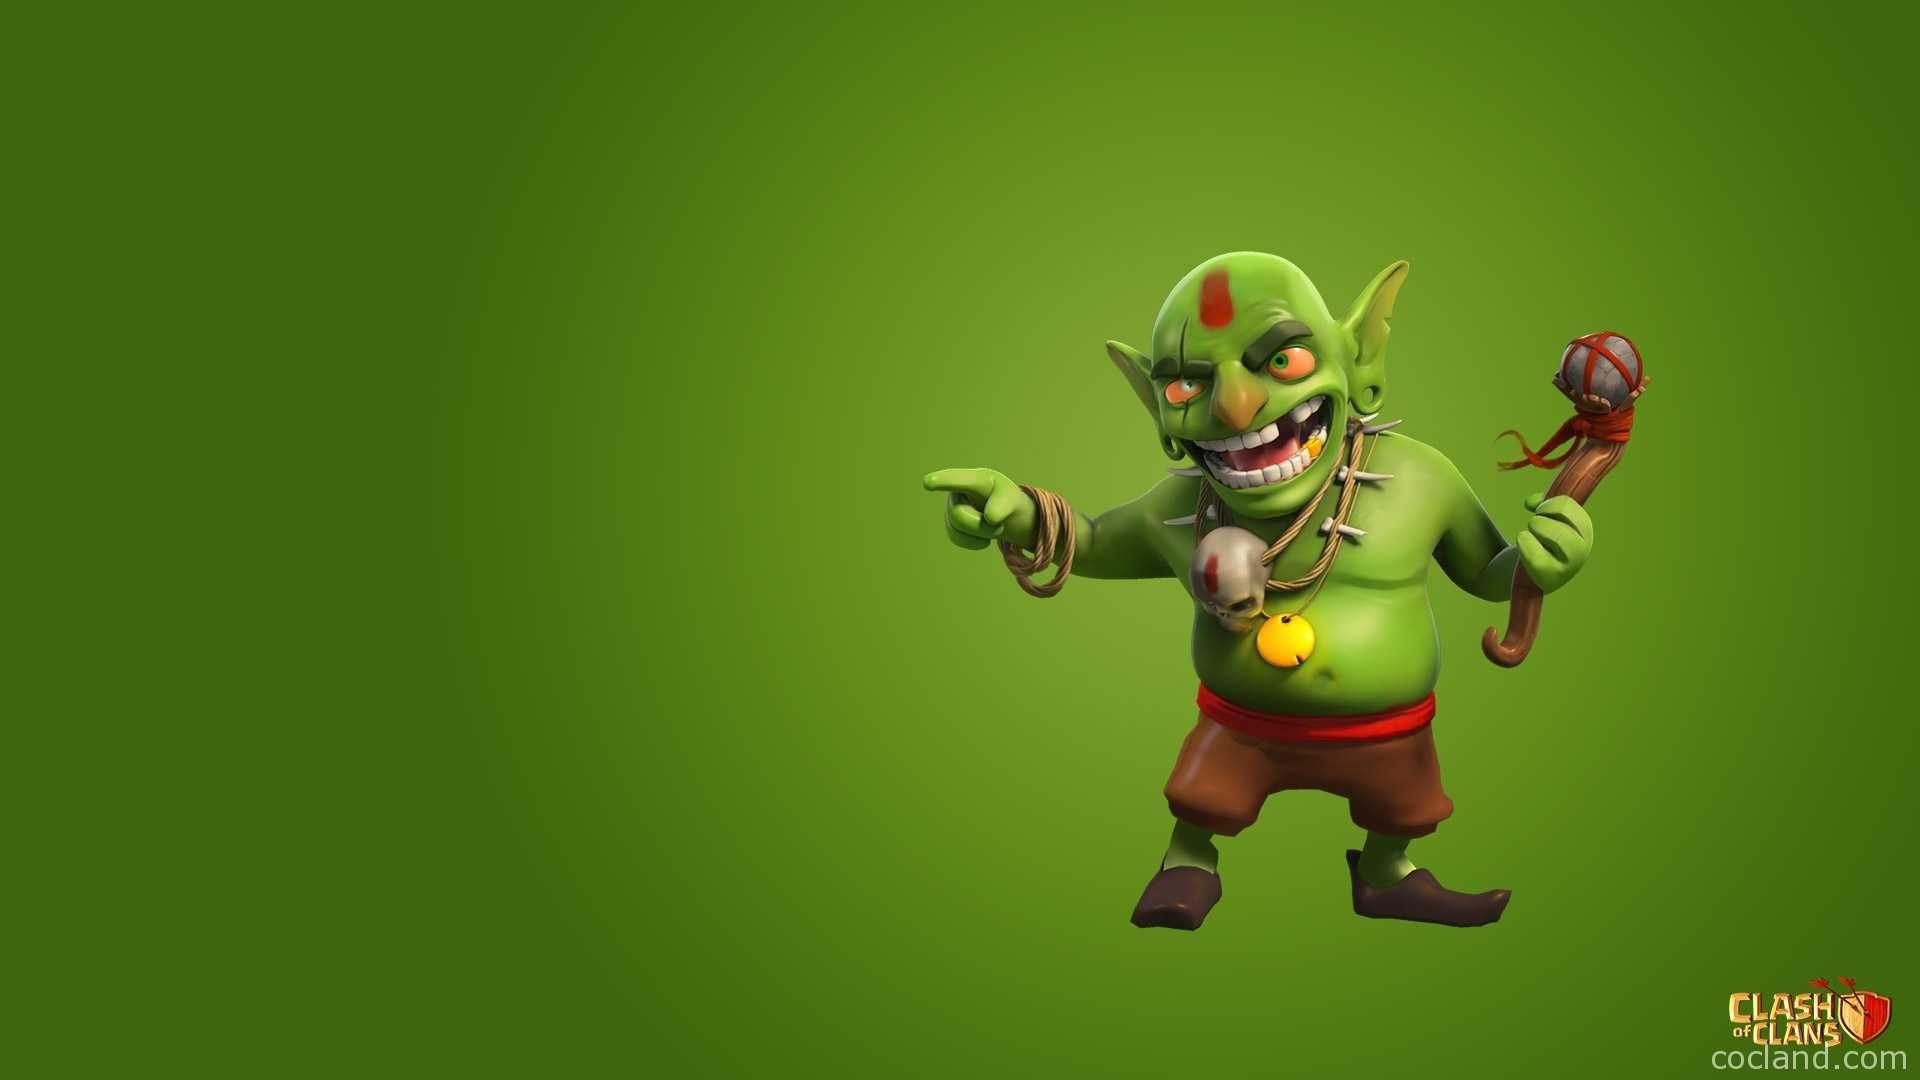 Clash Of Clans HD Wallpaper Coc 3D And For iPhone Full Pics Goblin